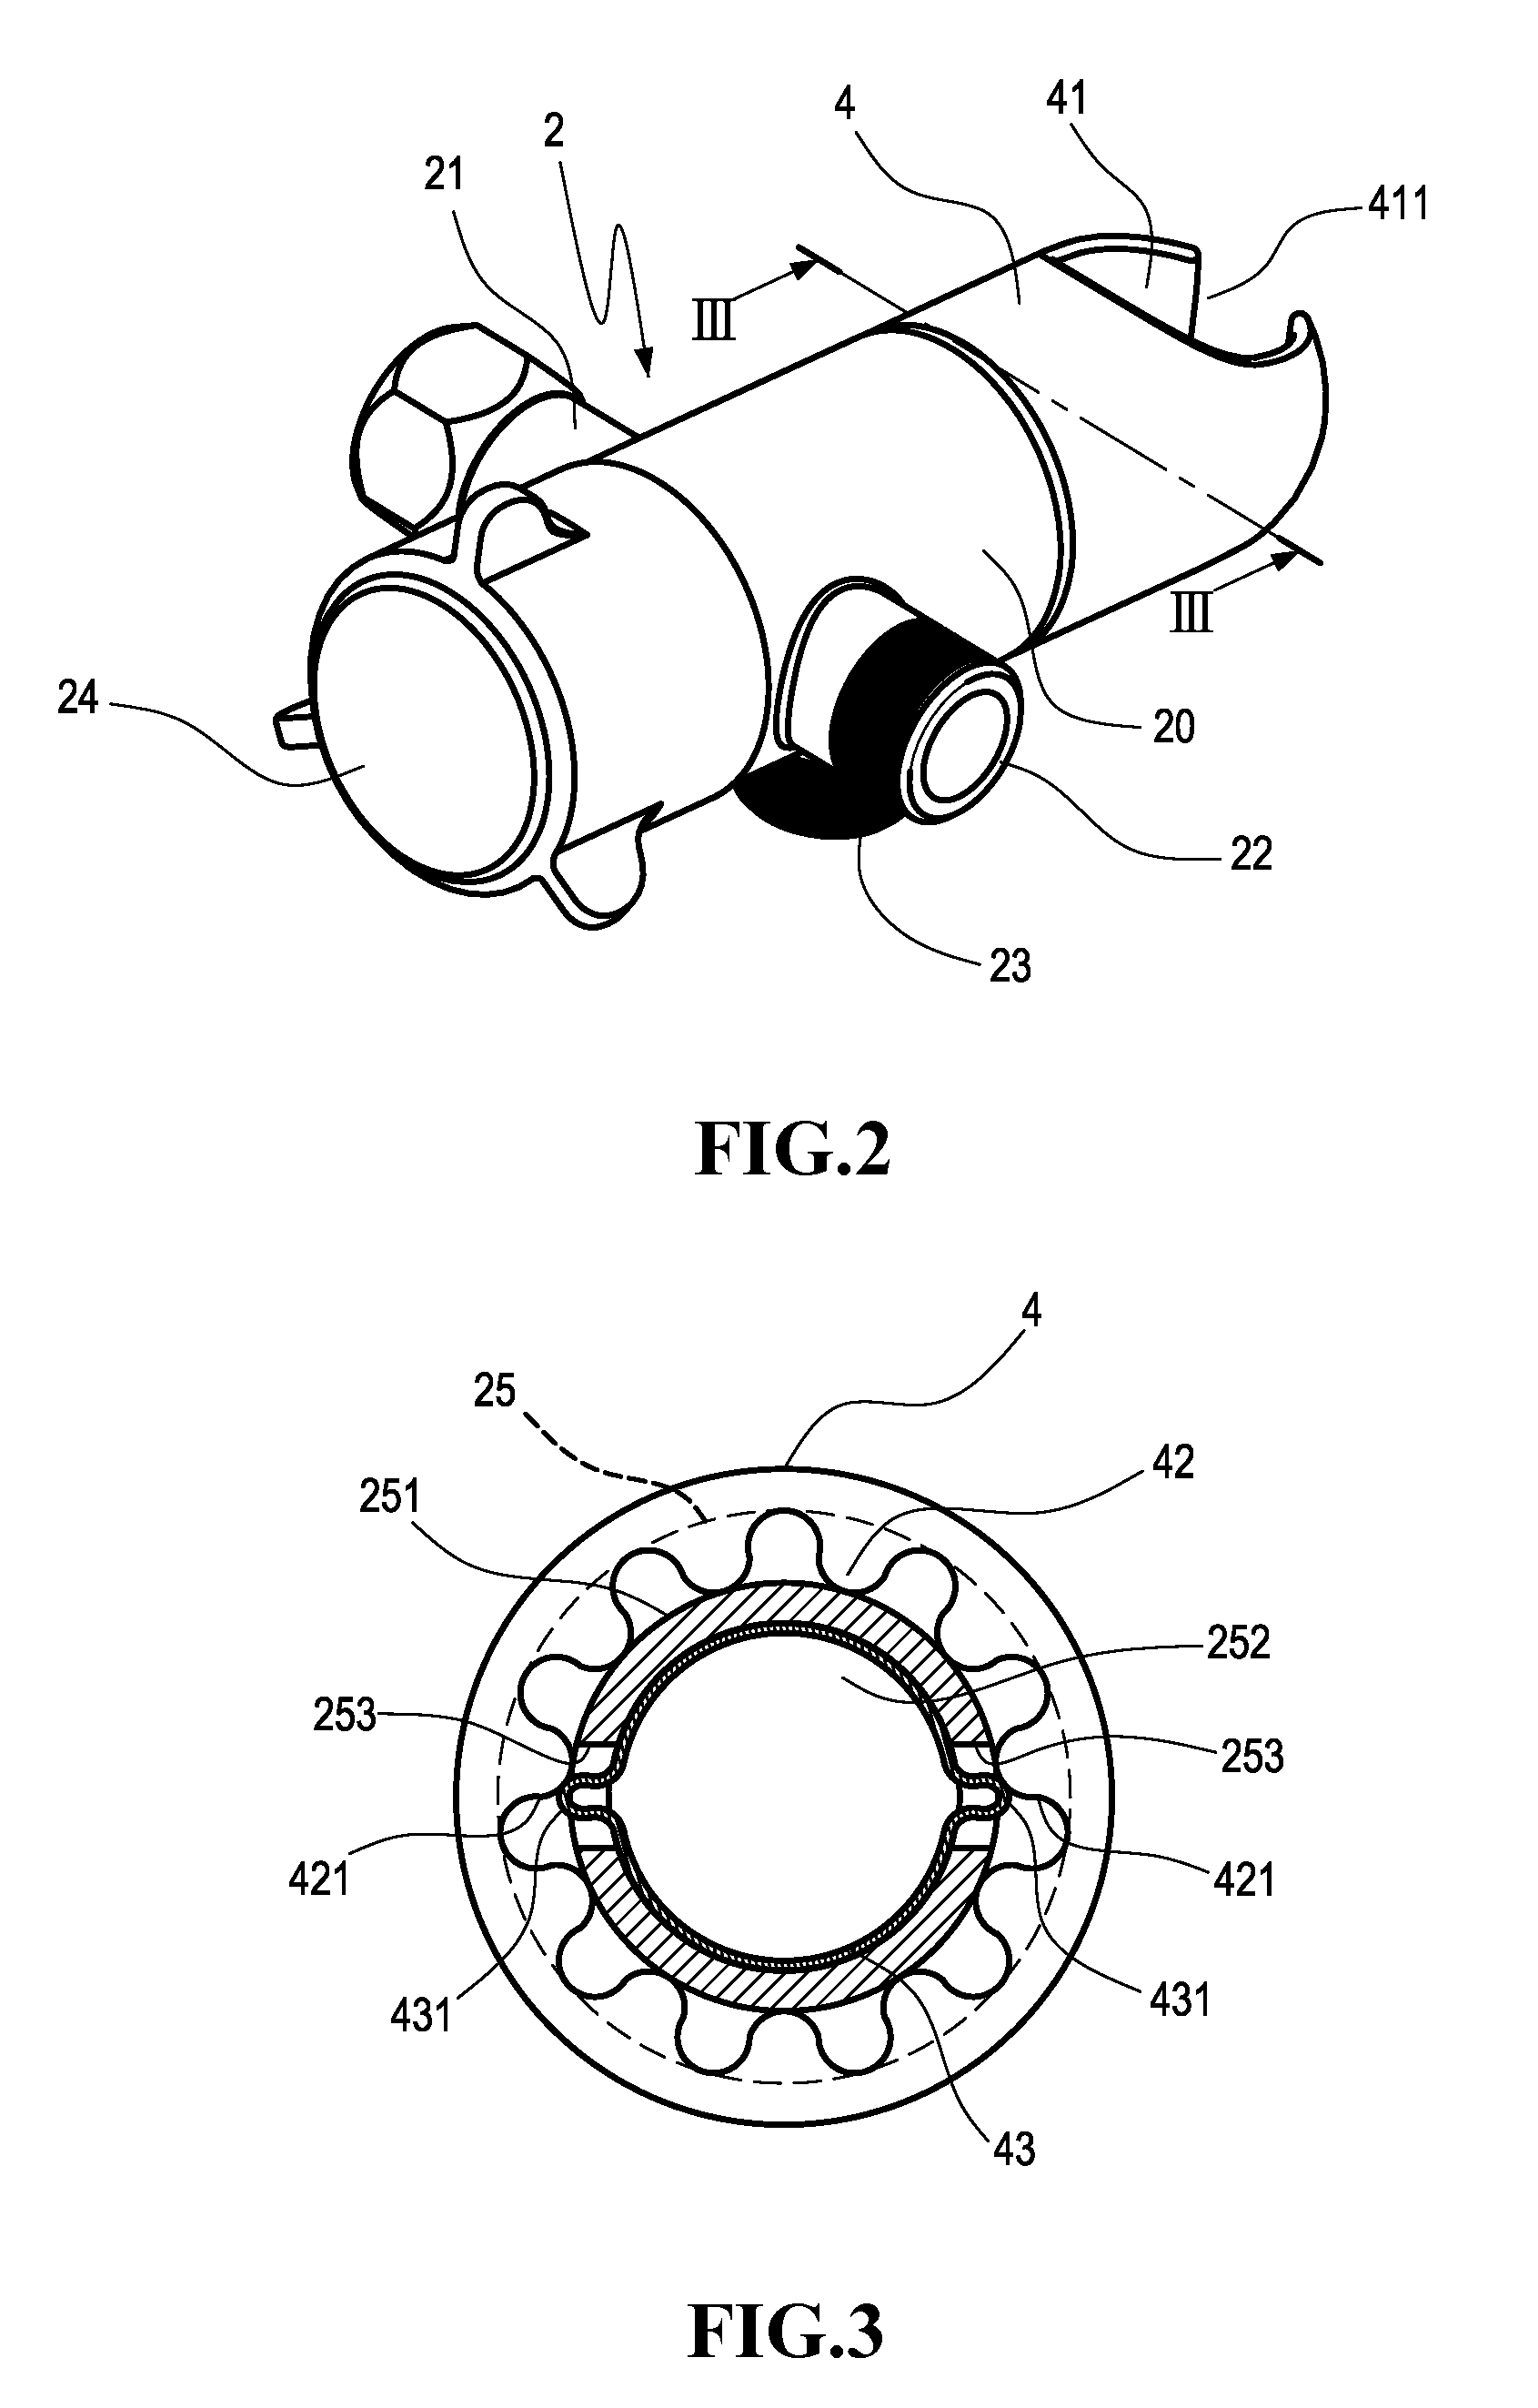 Diverter assembly for use in holding shower head and shower nozzle